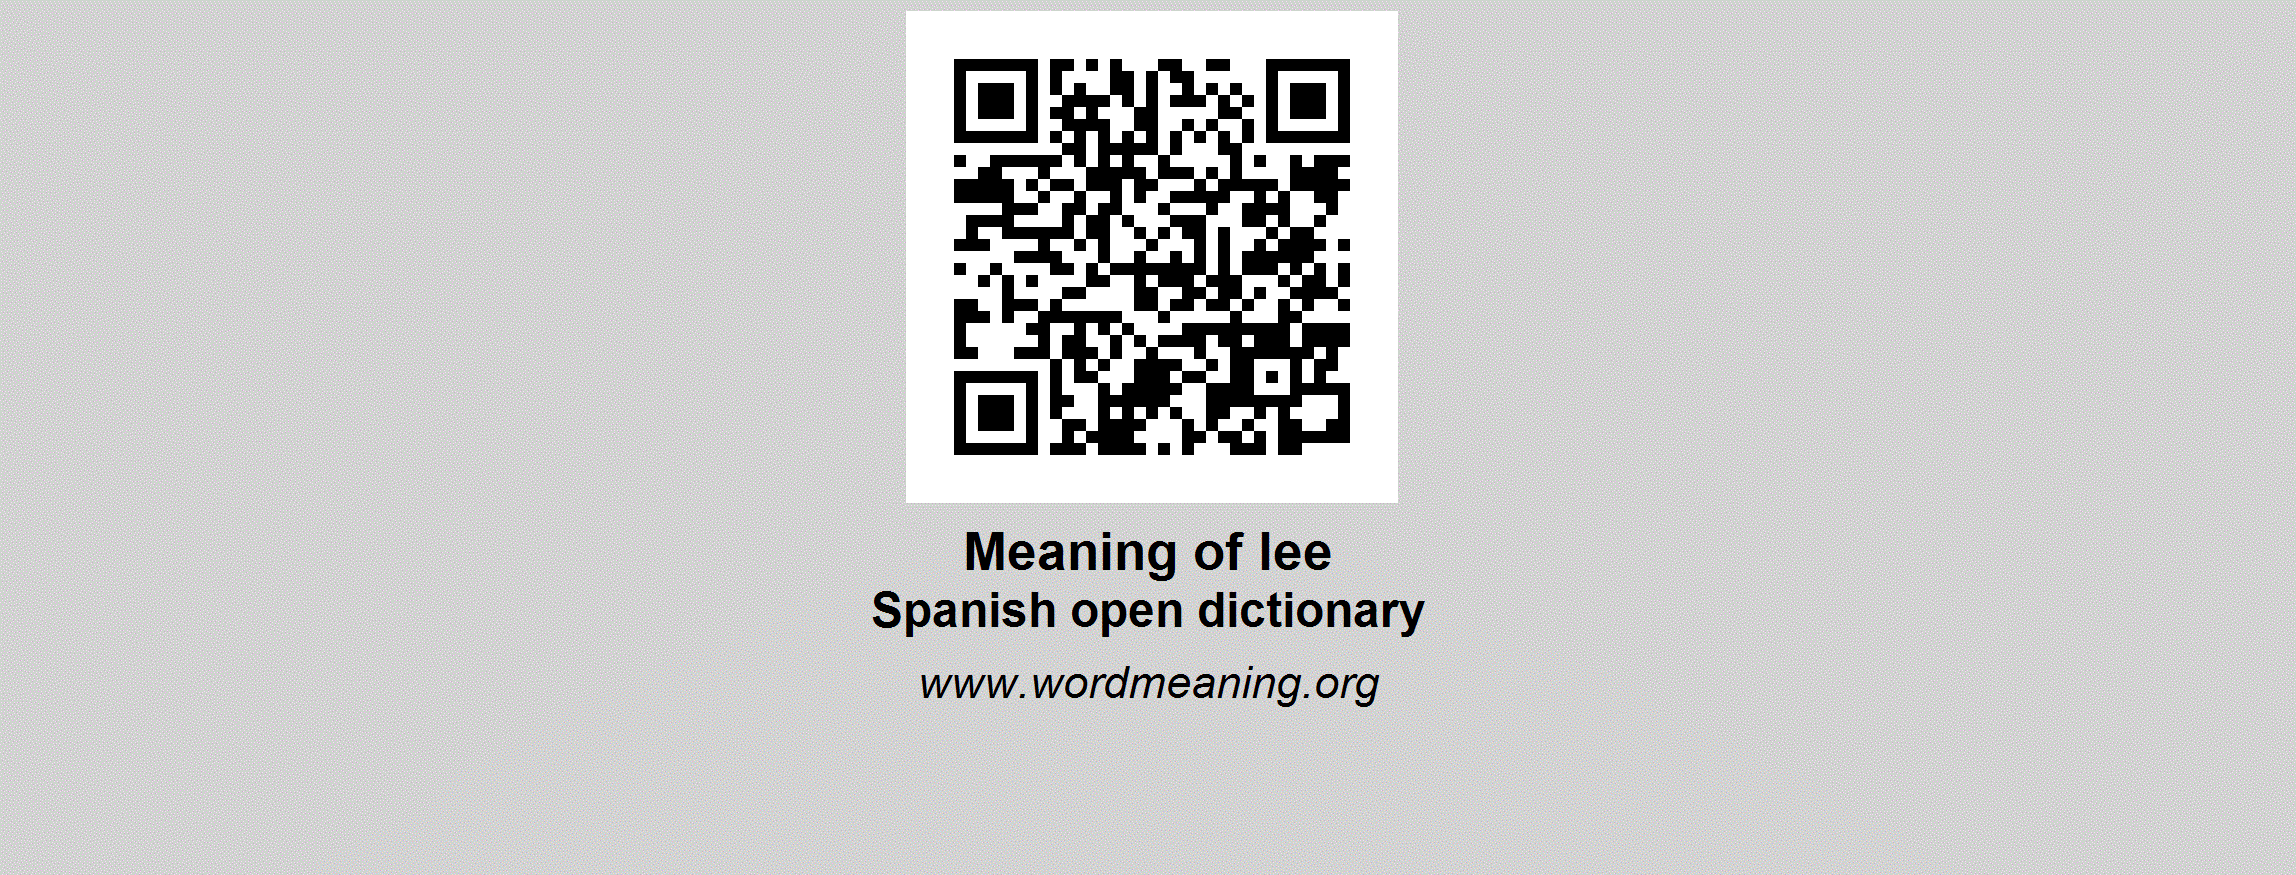 LEE - Spanish open dictionary